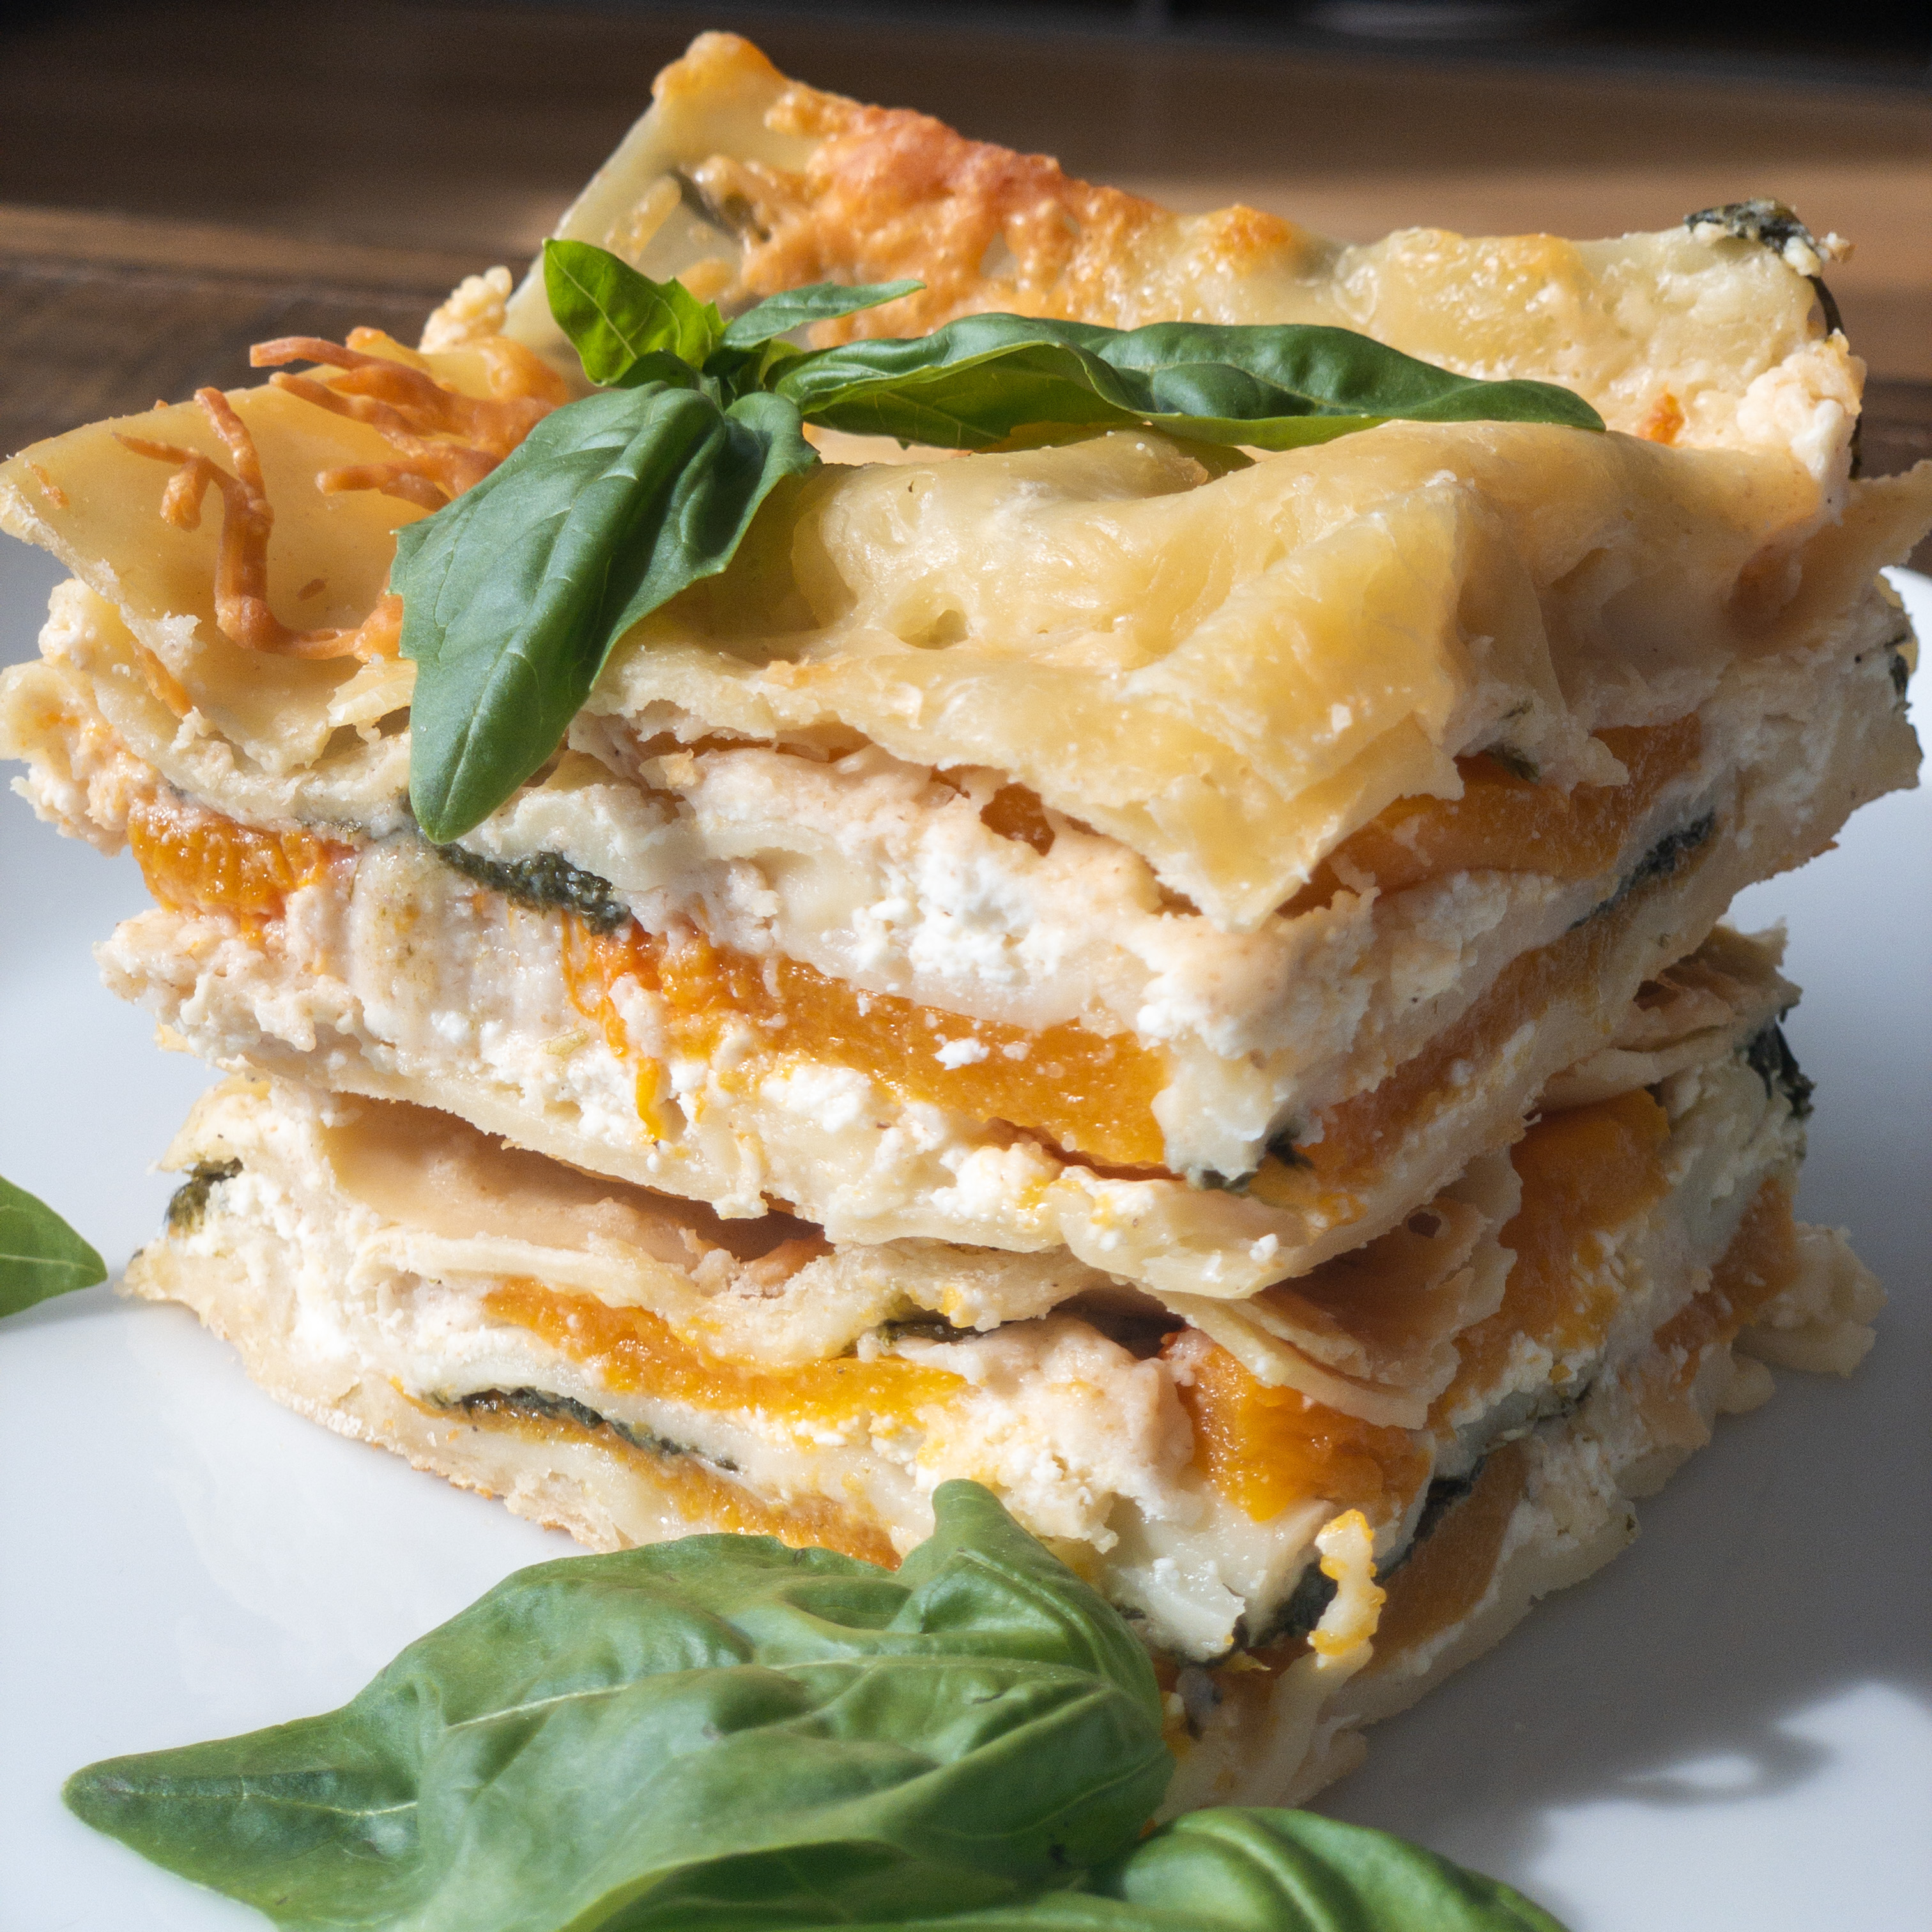 Spinach and butternut squash lasagna